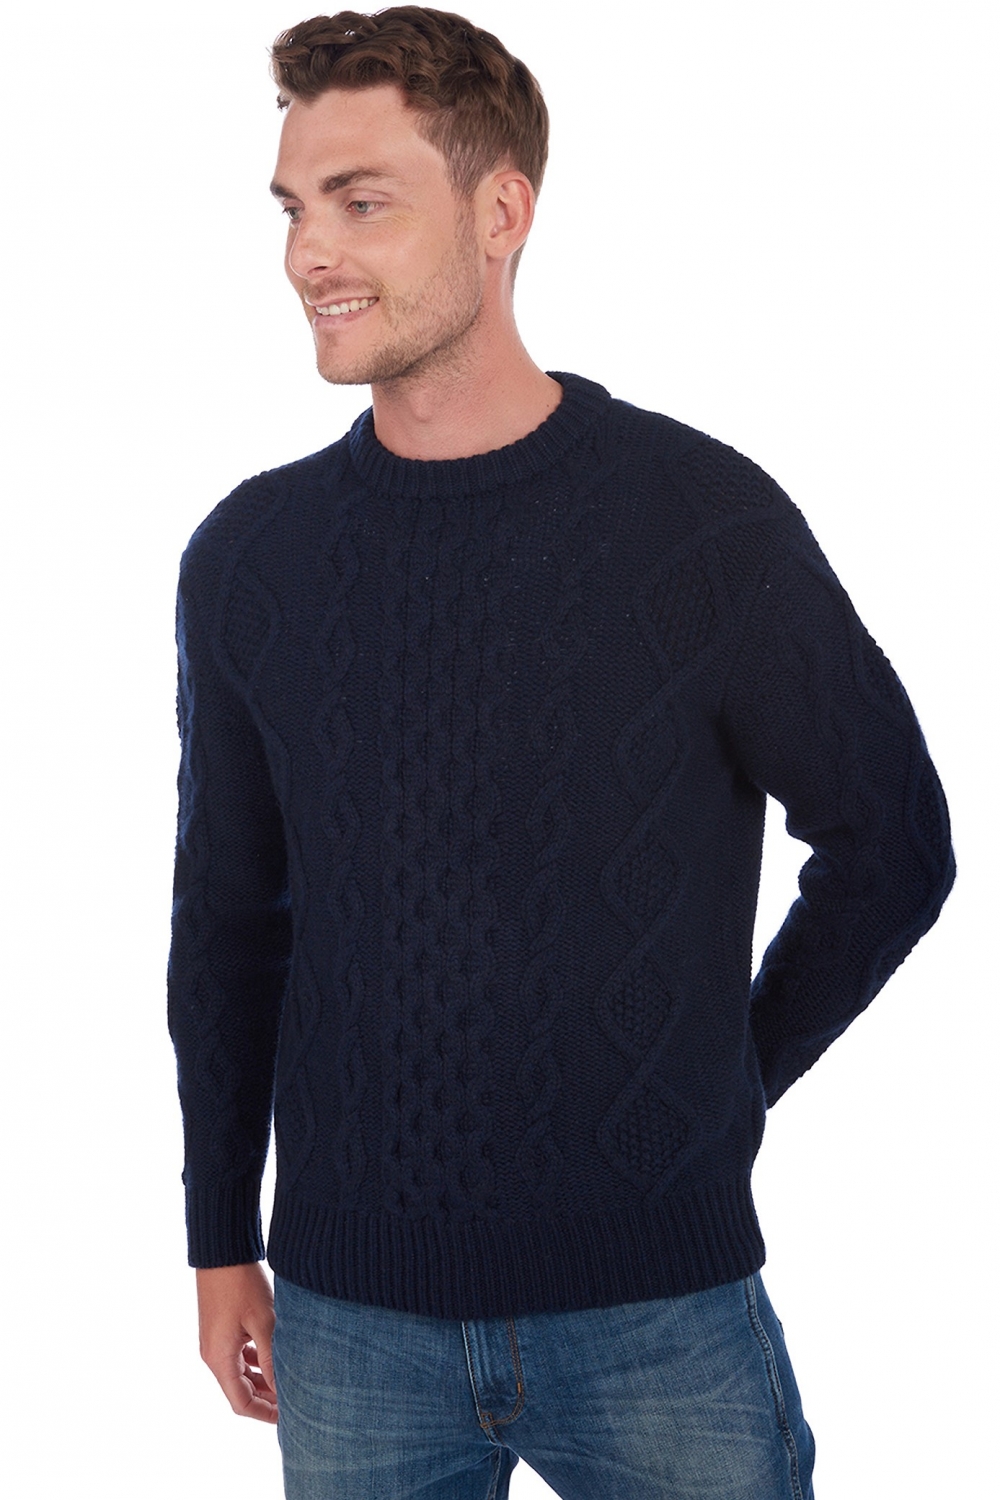 Cachemire pull homme acharnes marine fonce xl